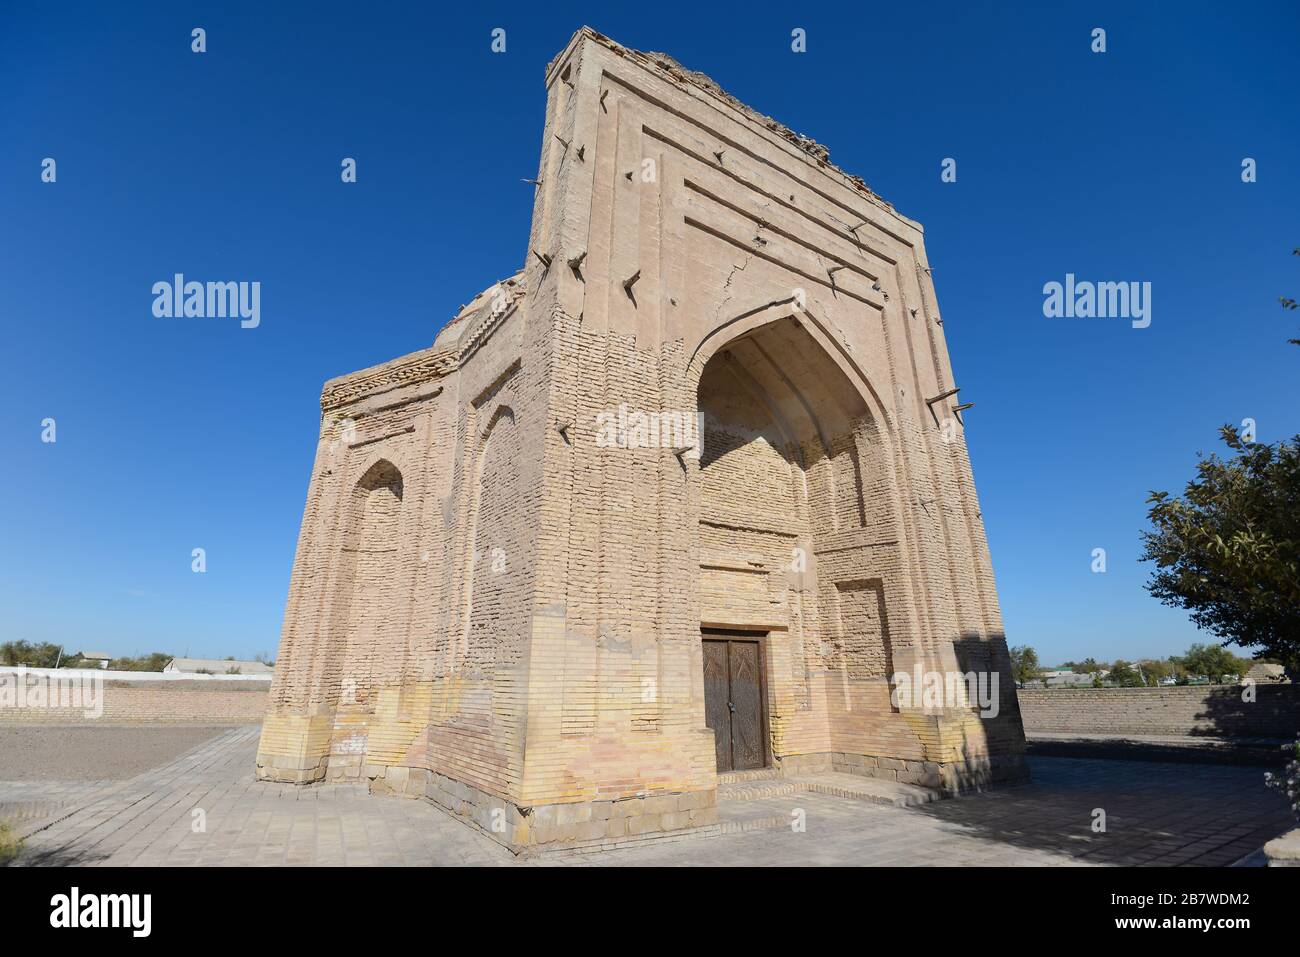 Sultan Ali Mausoleum in the centre of the new town of Kunya Urgench, Turkmenistan within a Muslim cemetery. Listed as UNESCO World Heritage Site. Stock Photo